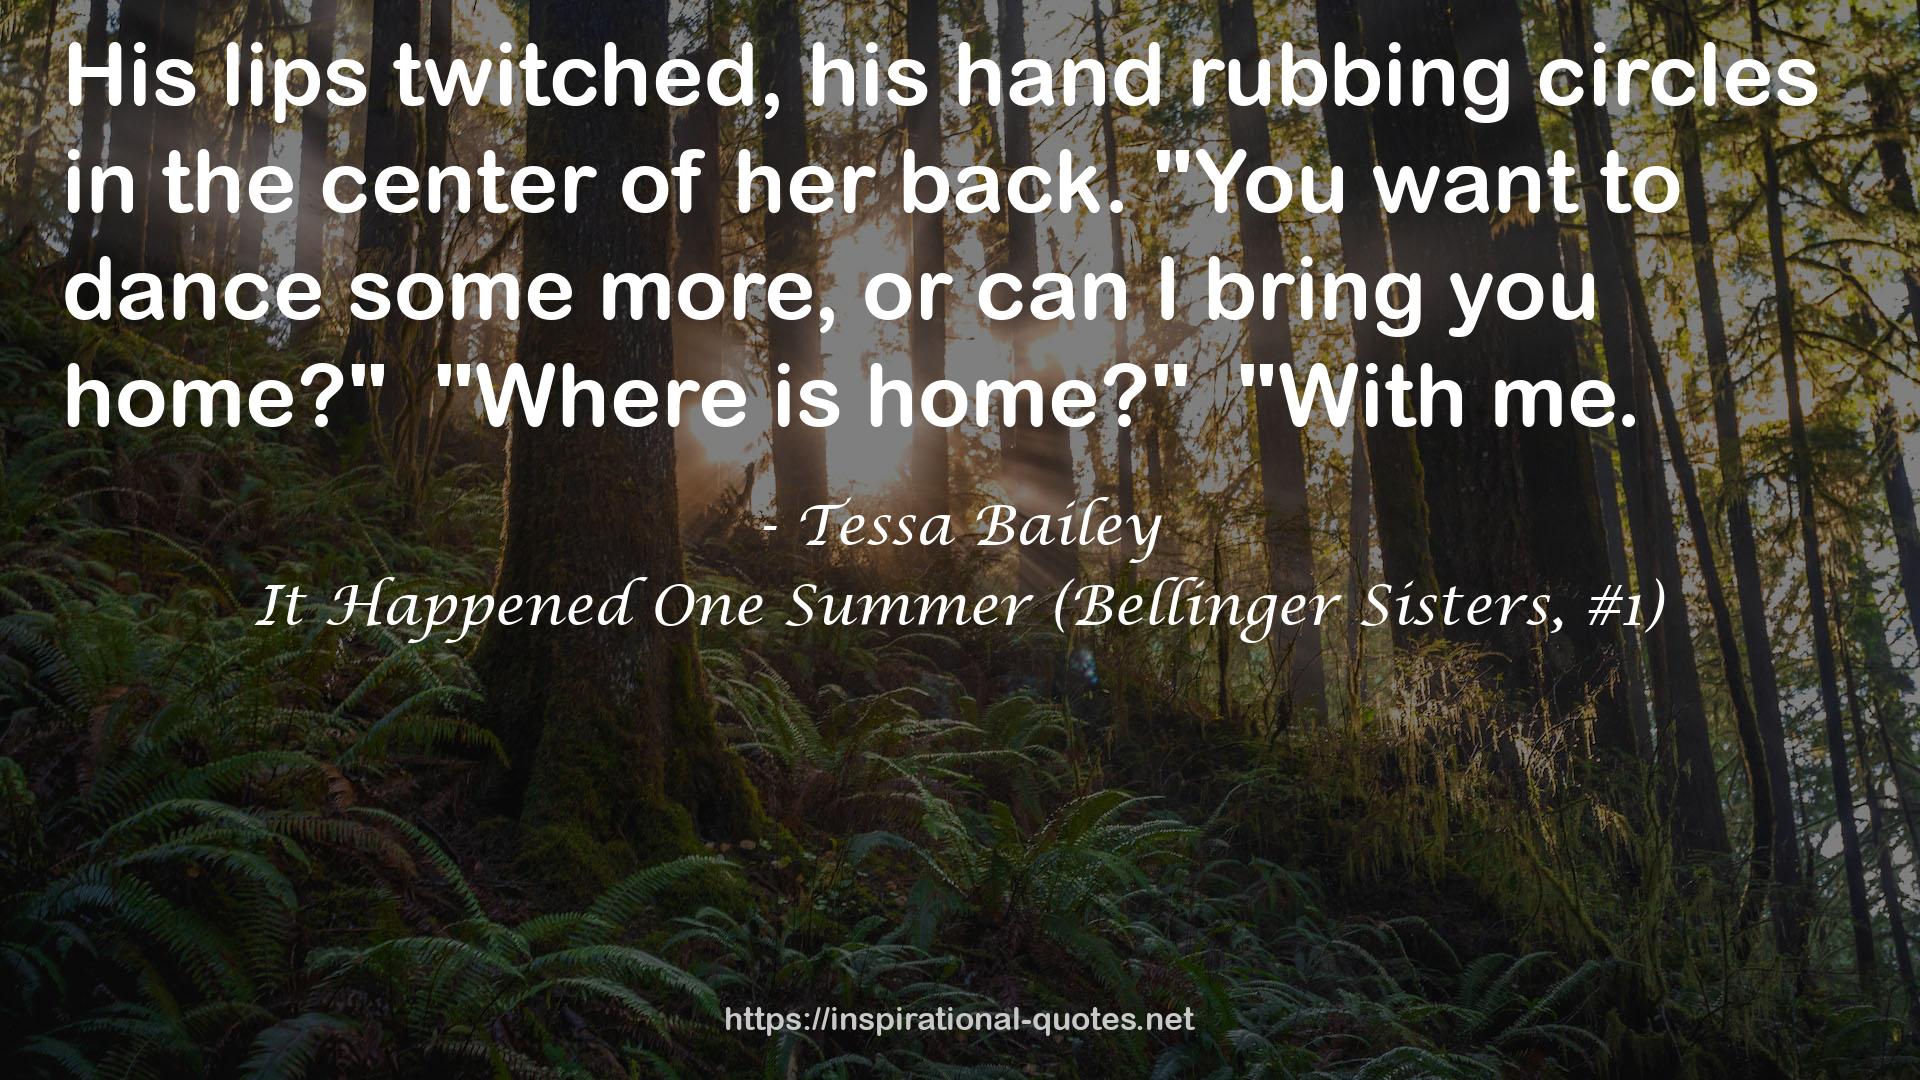 It Happened One Summer (Bellinger Sisters, #1) QUOTES